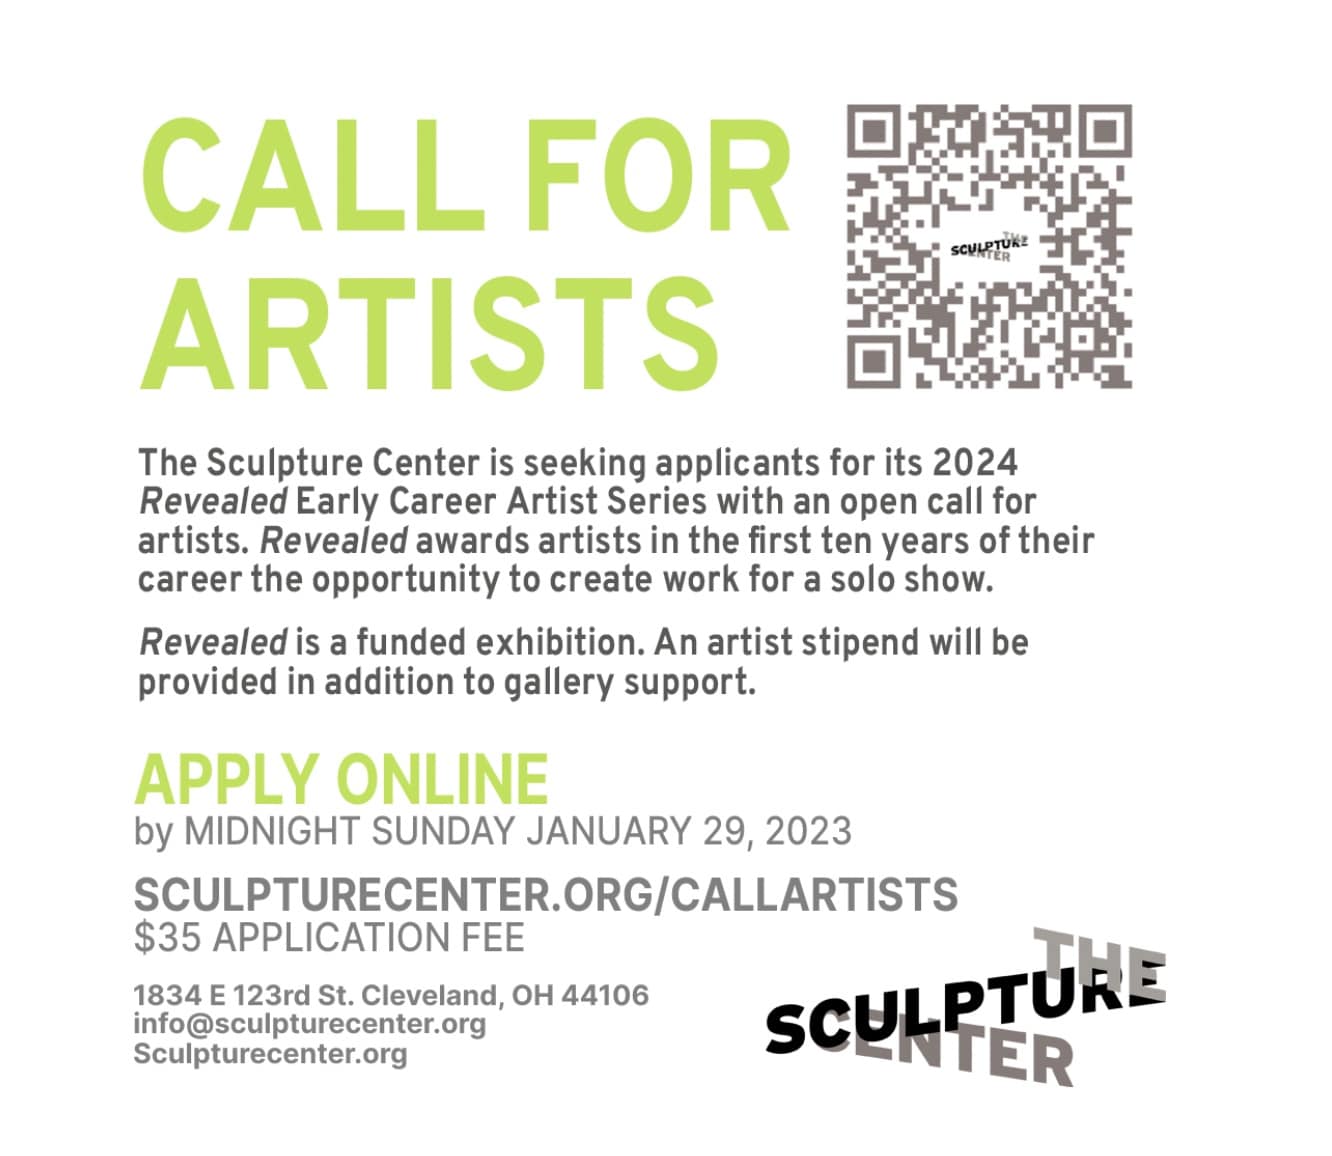 Call For Artists: The Sculpture Center in Cleveland